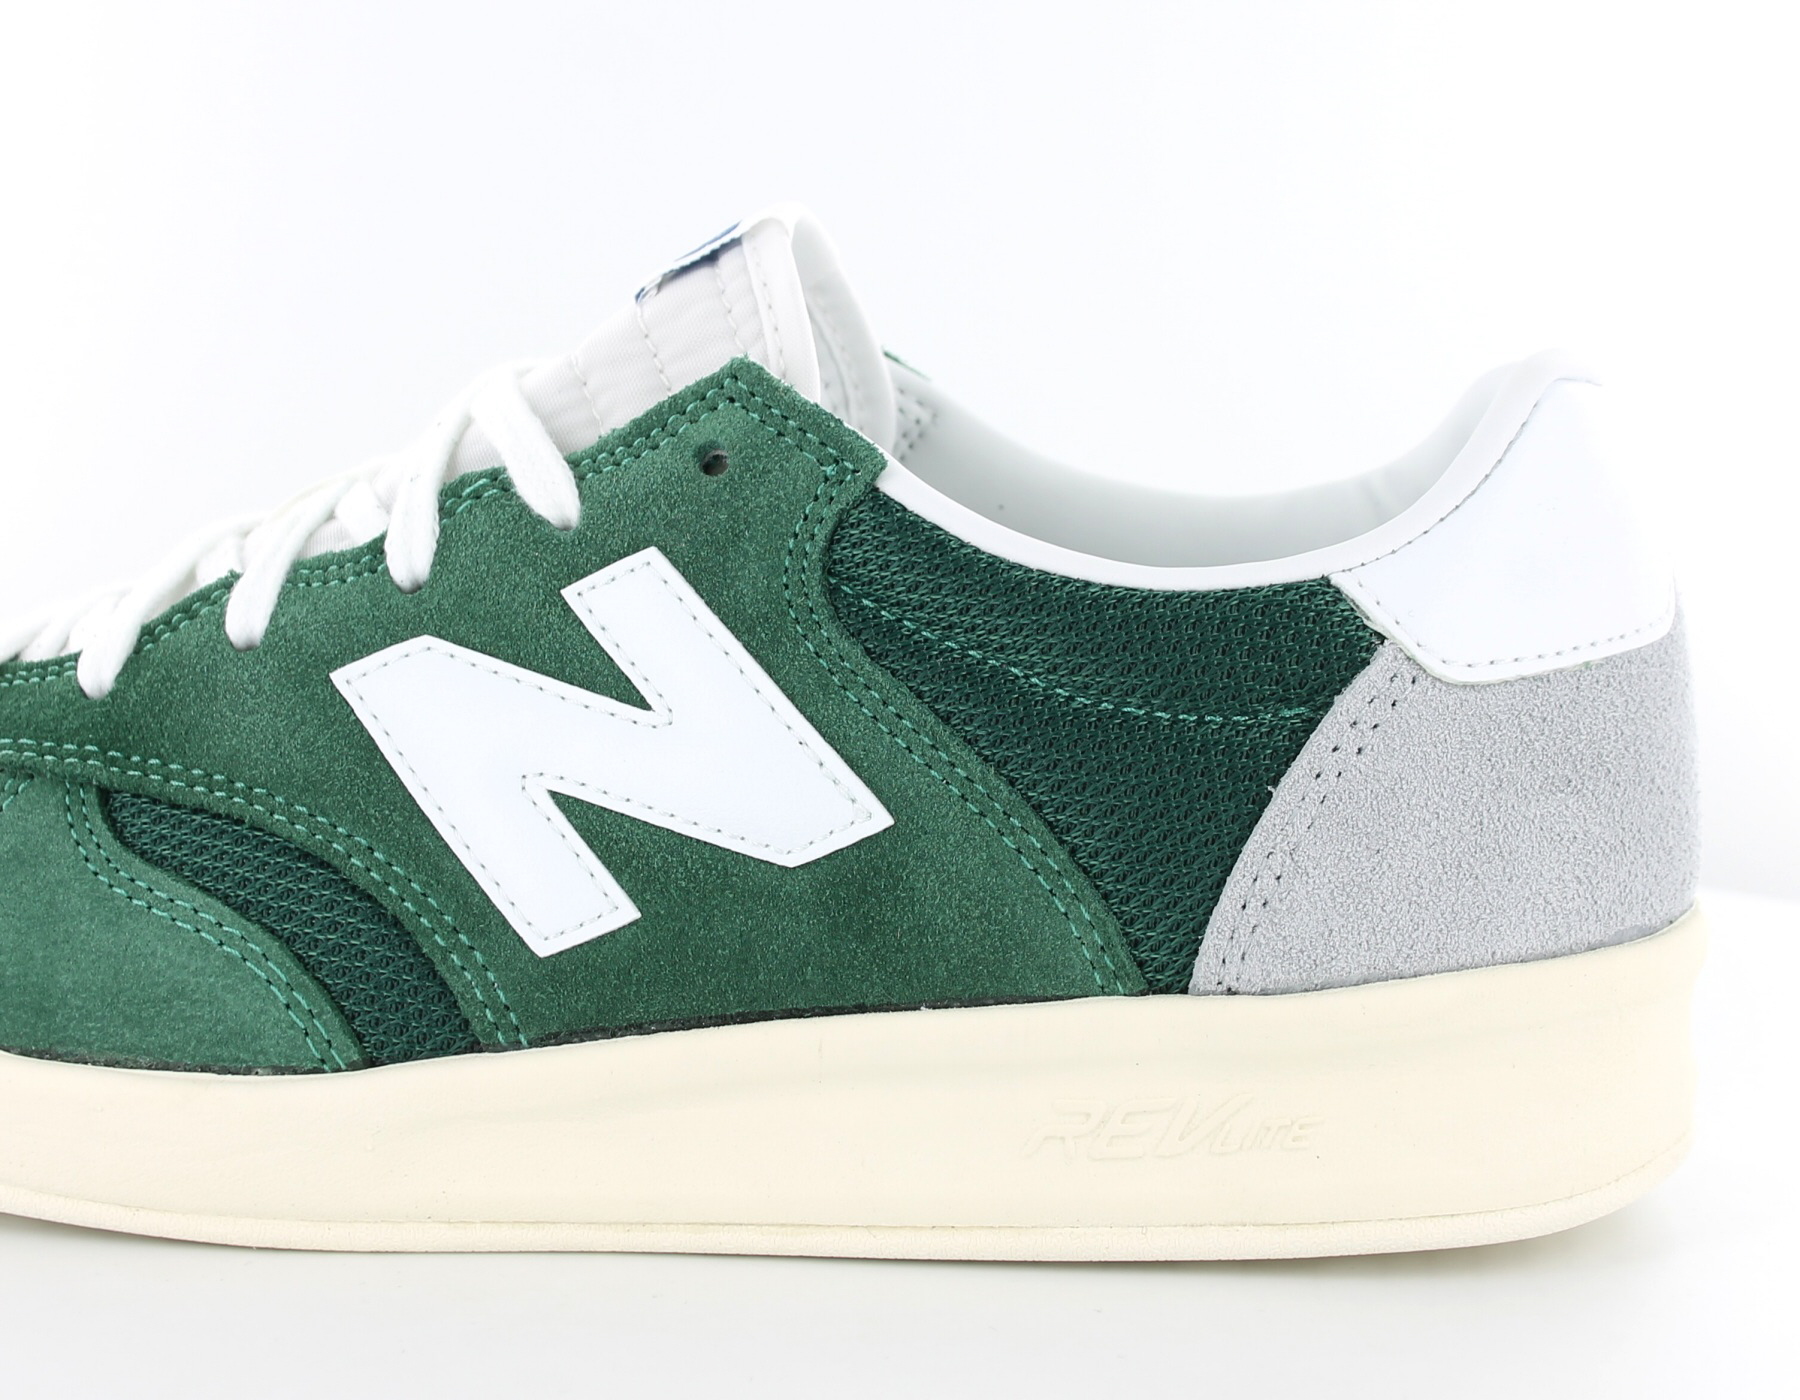 new balance 300 vintage sneakers